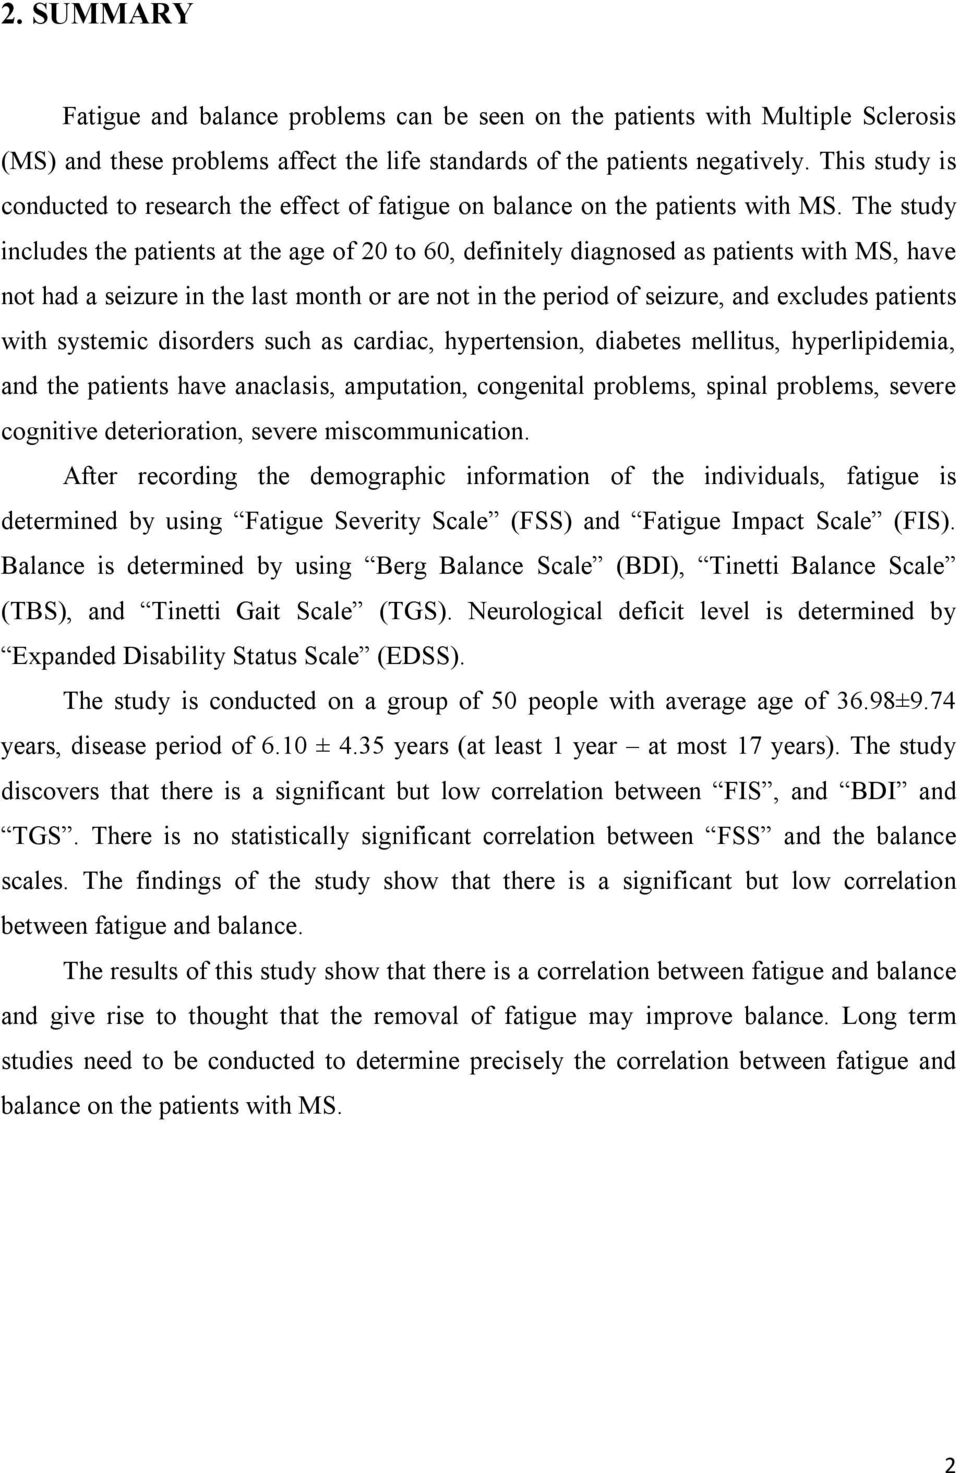 The study includes the patients at the age of 20 to 60, definitely diagnosed as patients with MS, have not had a seizure in the last month or are not in the period of seizure, and excludes patients